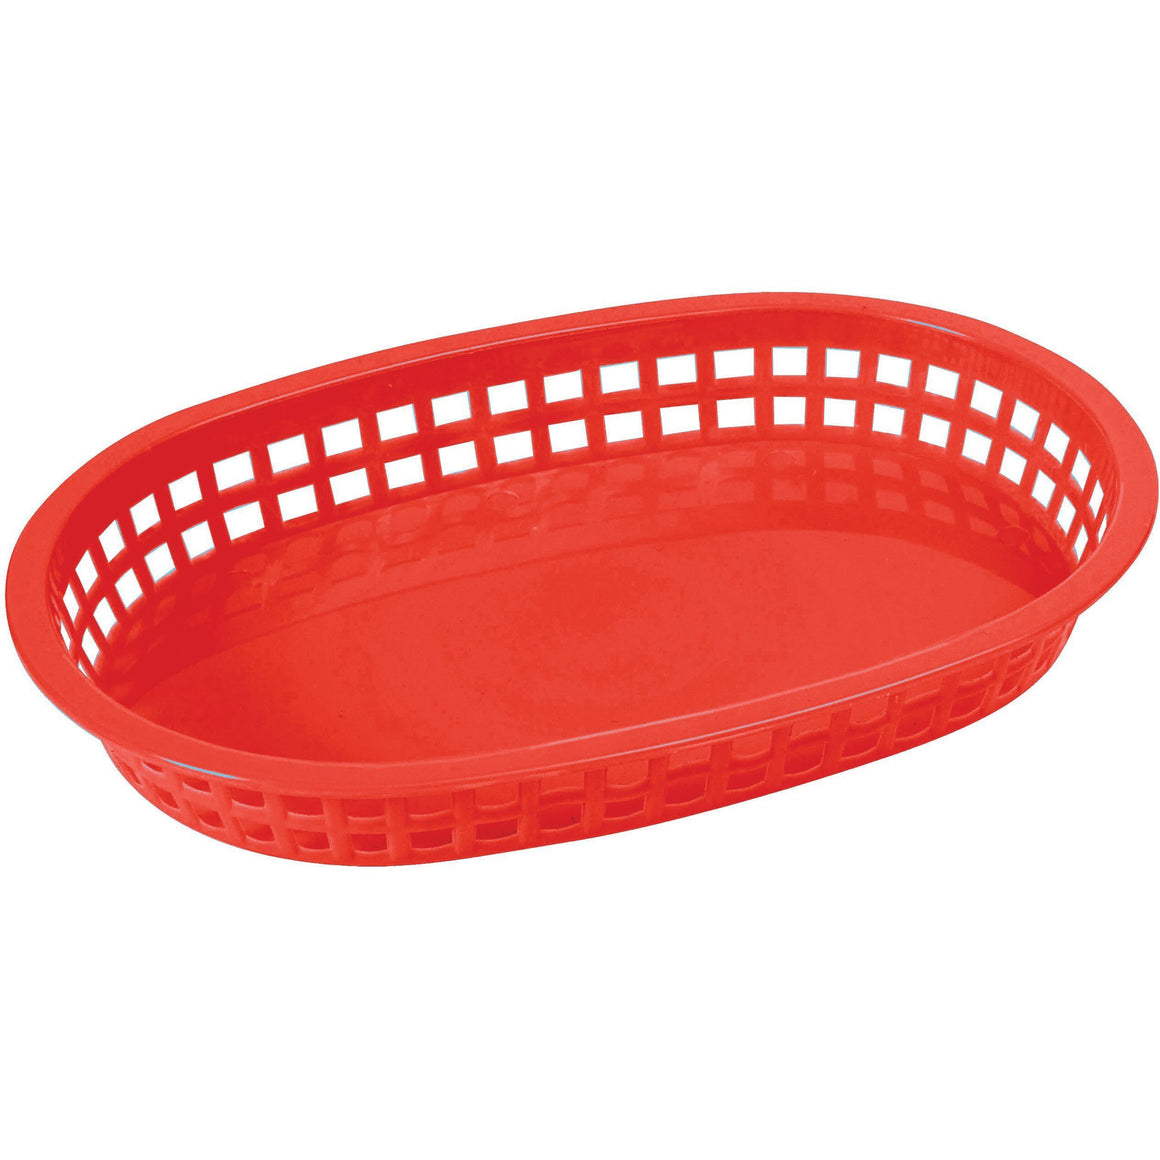 Winco - PLB-R - Platter Baskets, Oval, 10-3/4" x 7-1/4" x 1-1/2", Red - Tabletop - Maltese & Co New and Used  restaurant Equipment 